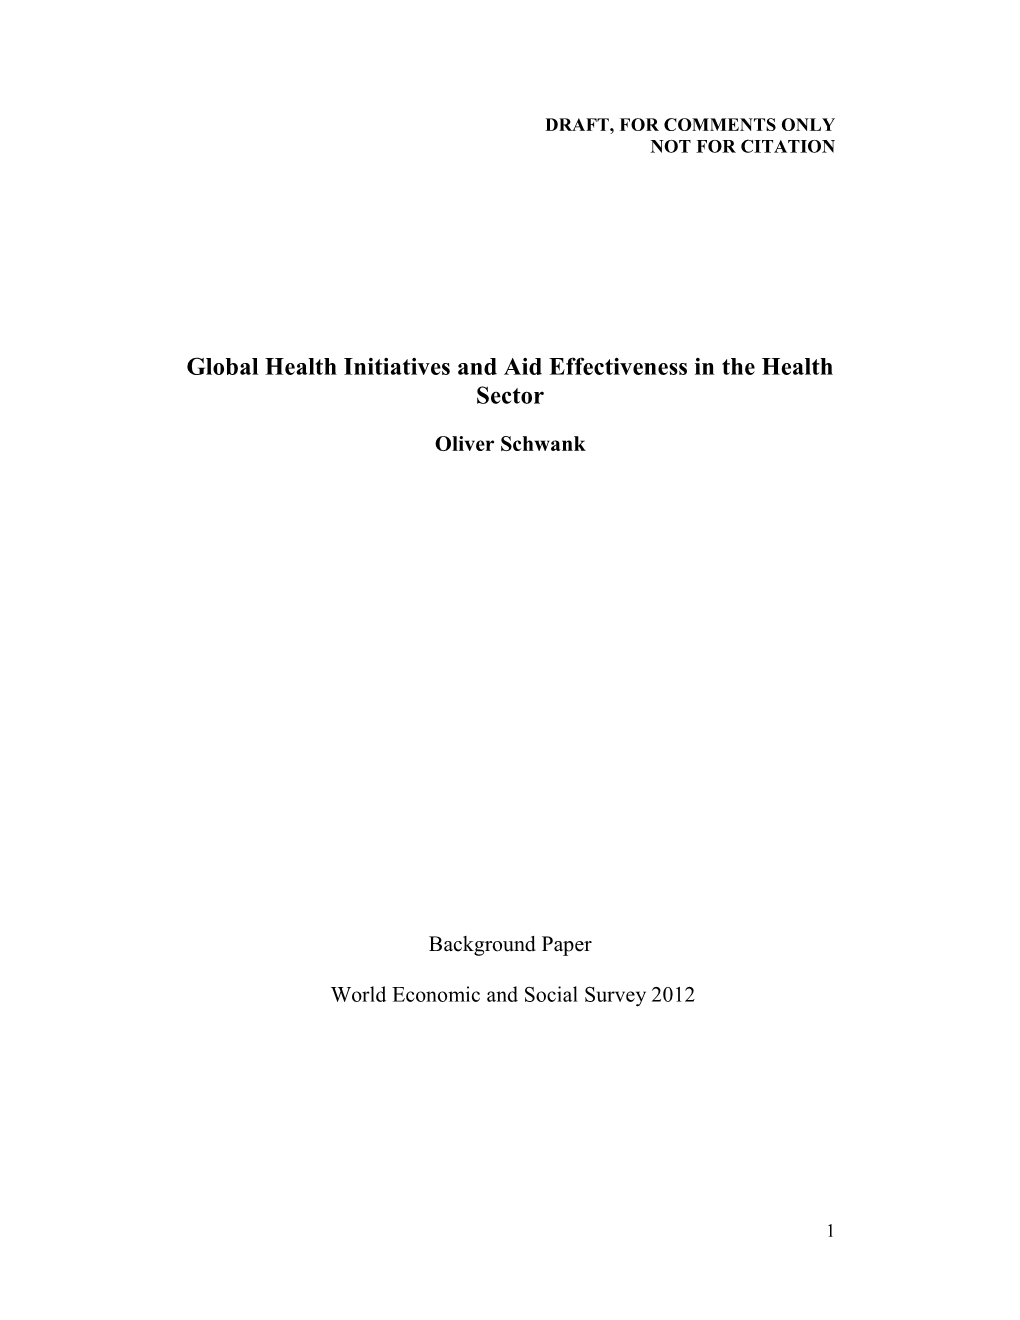 Global Health Initiatives and Aid Effectiveness in the Health Sector